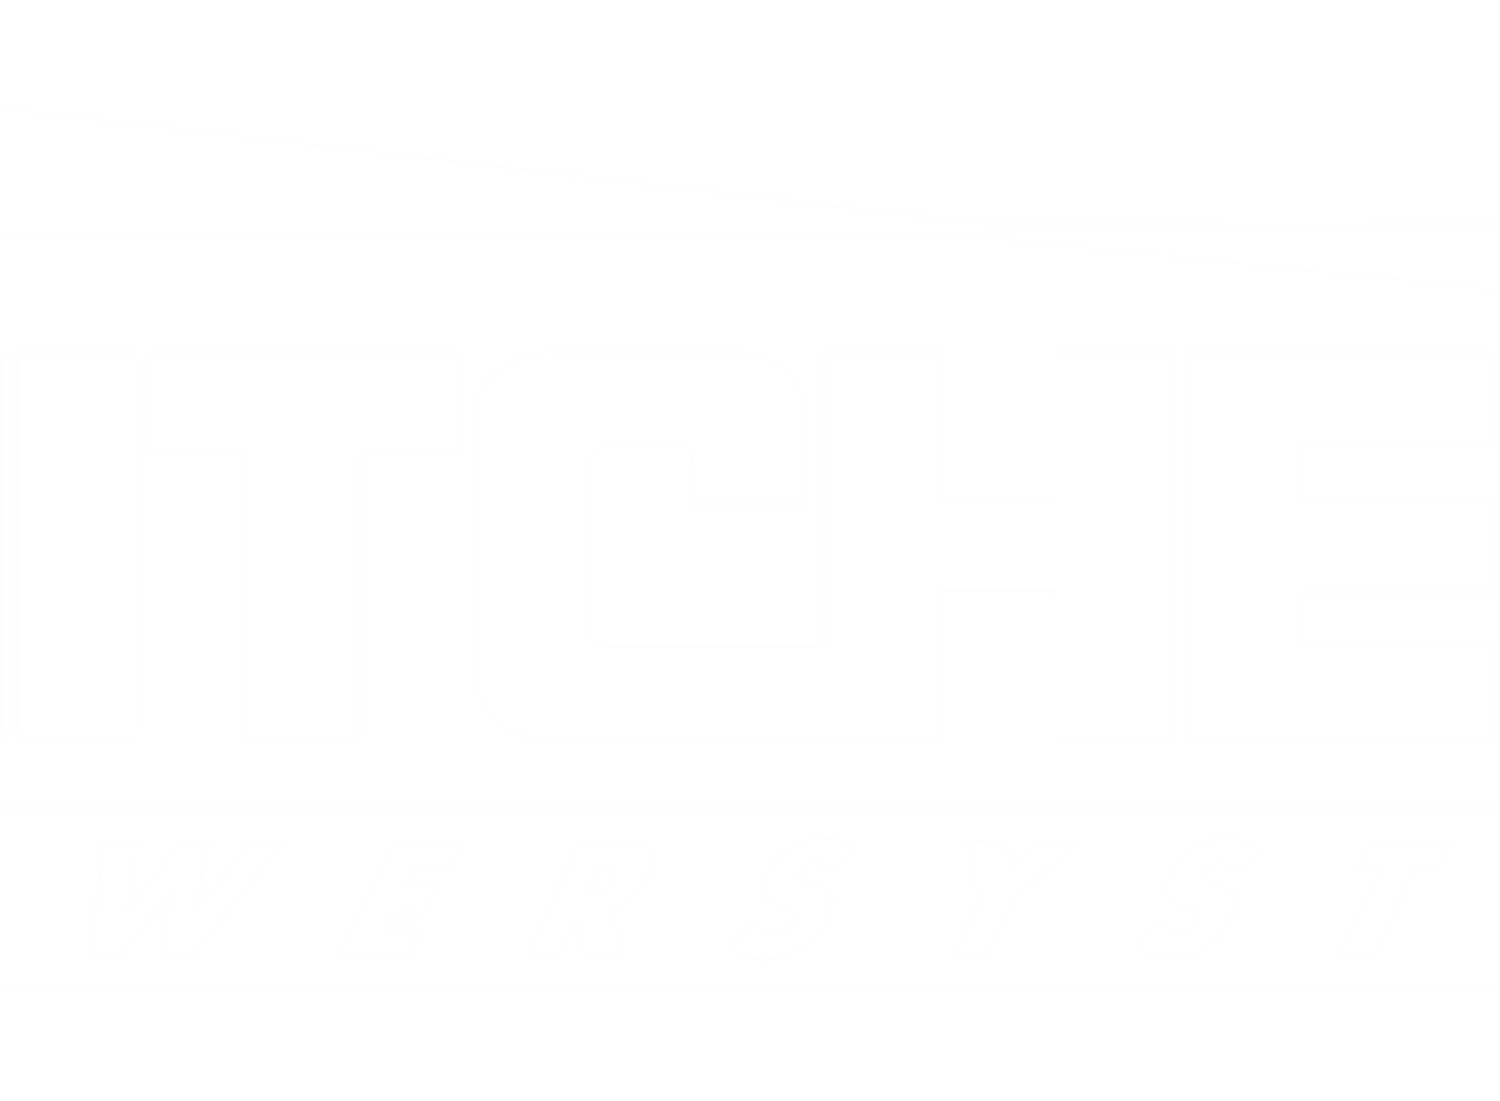 Mitchell Powersystems logo in white